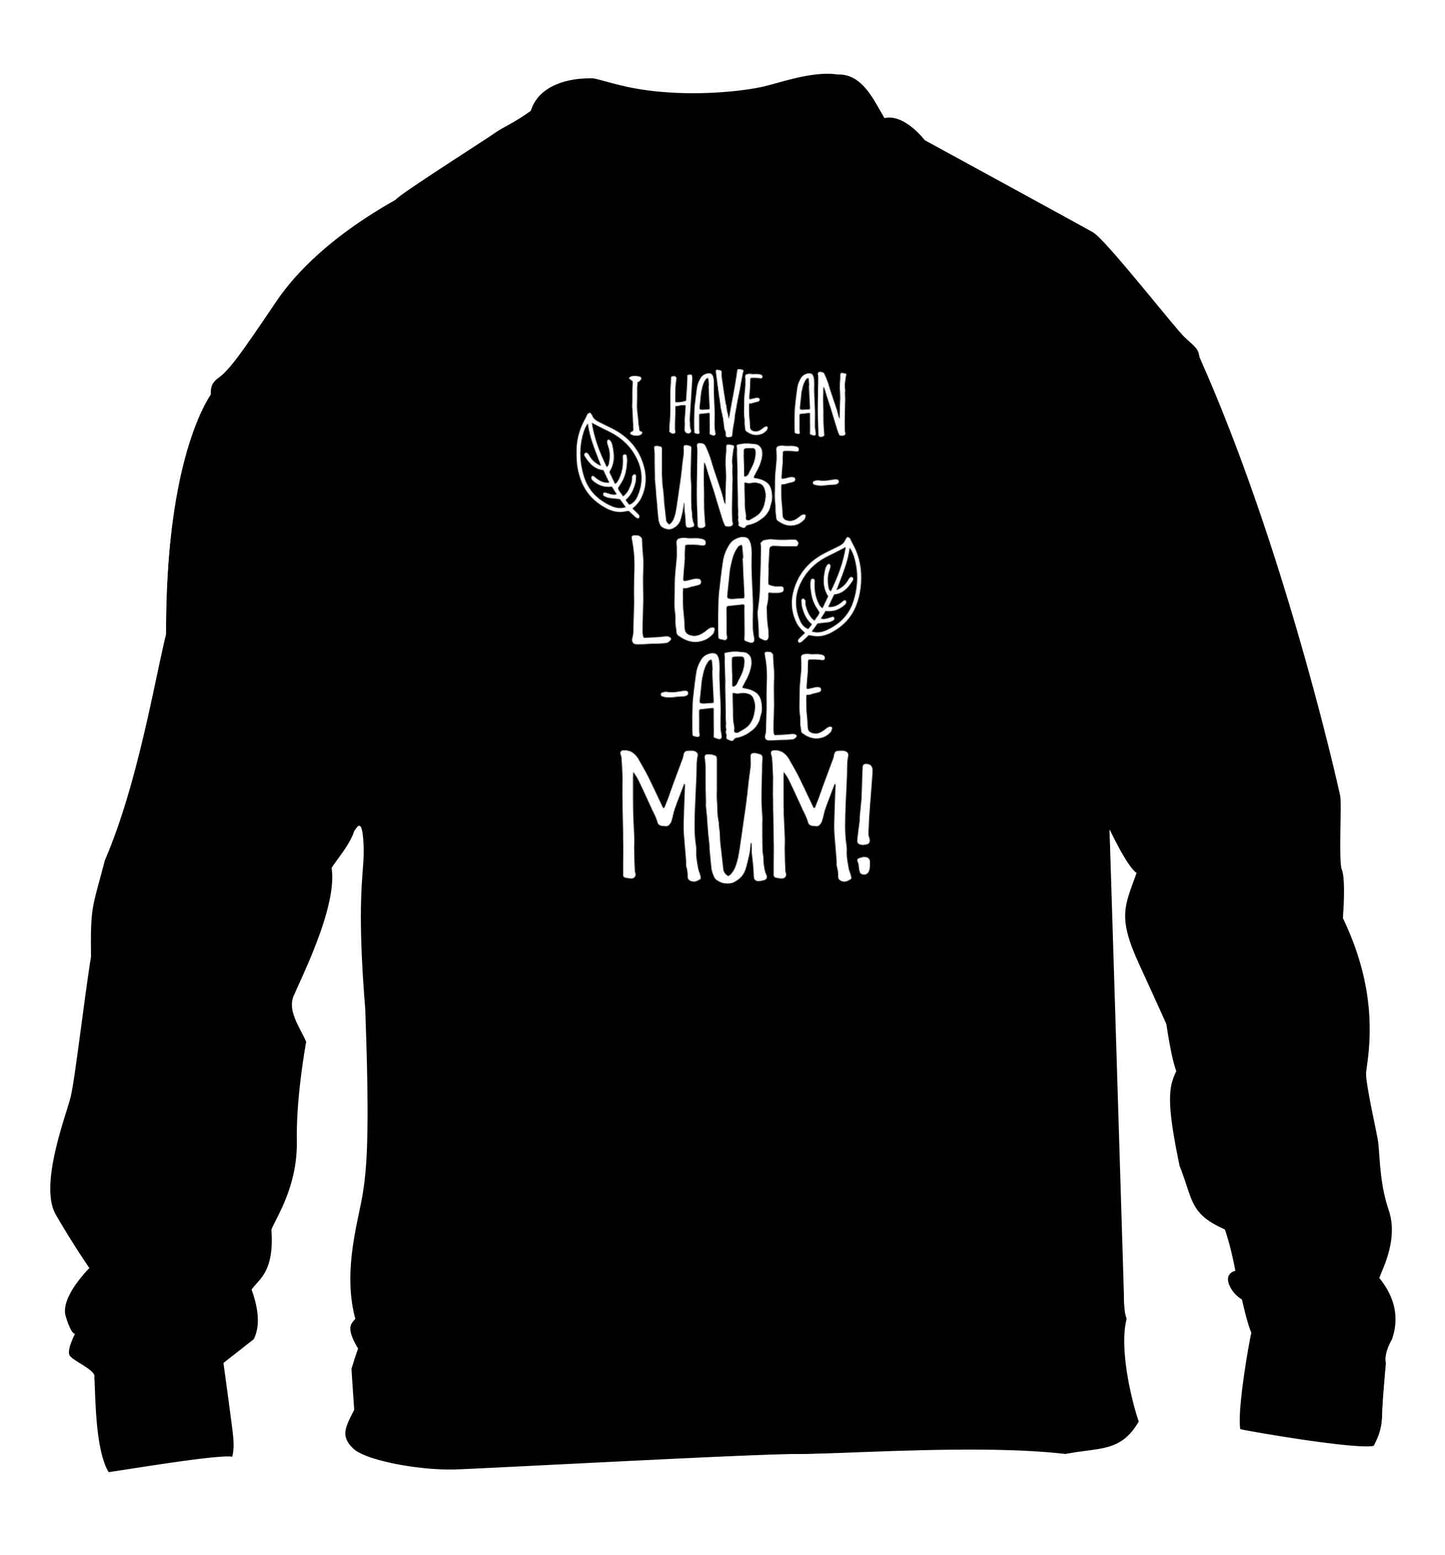 I have an unbeleafable mum! children's black sweater 12-13 Years